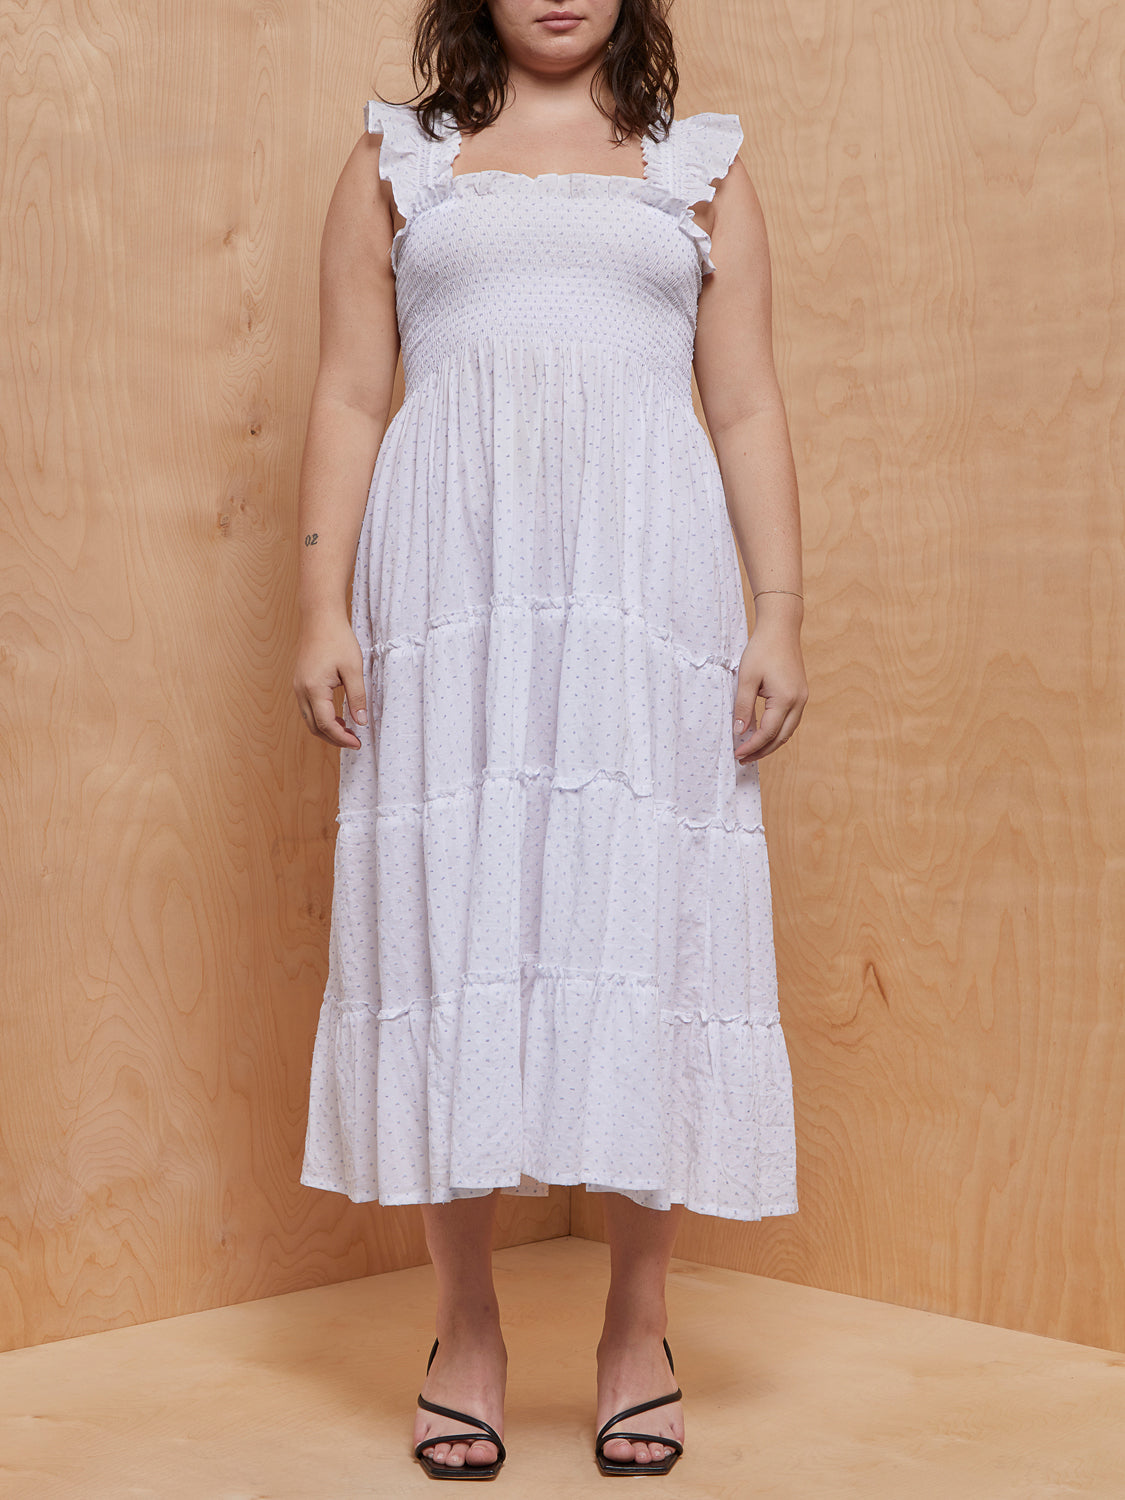 Hill House The Nap Dress in Blue Dot